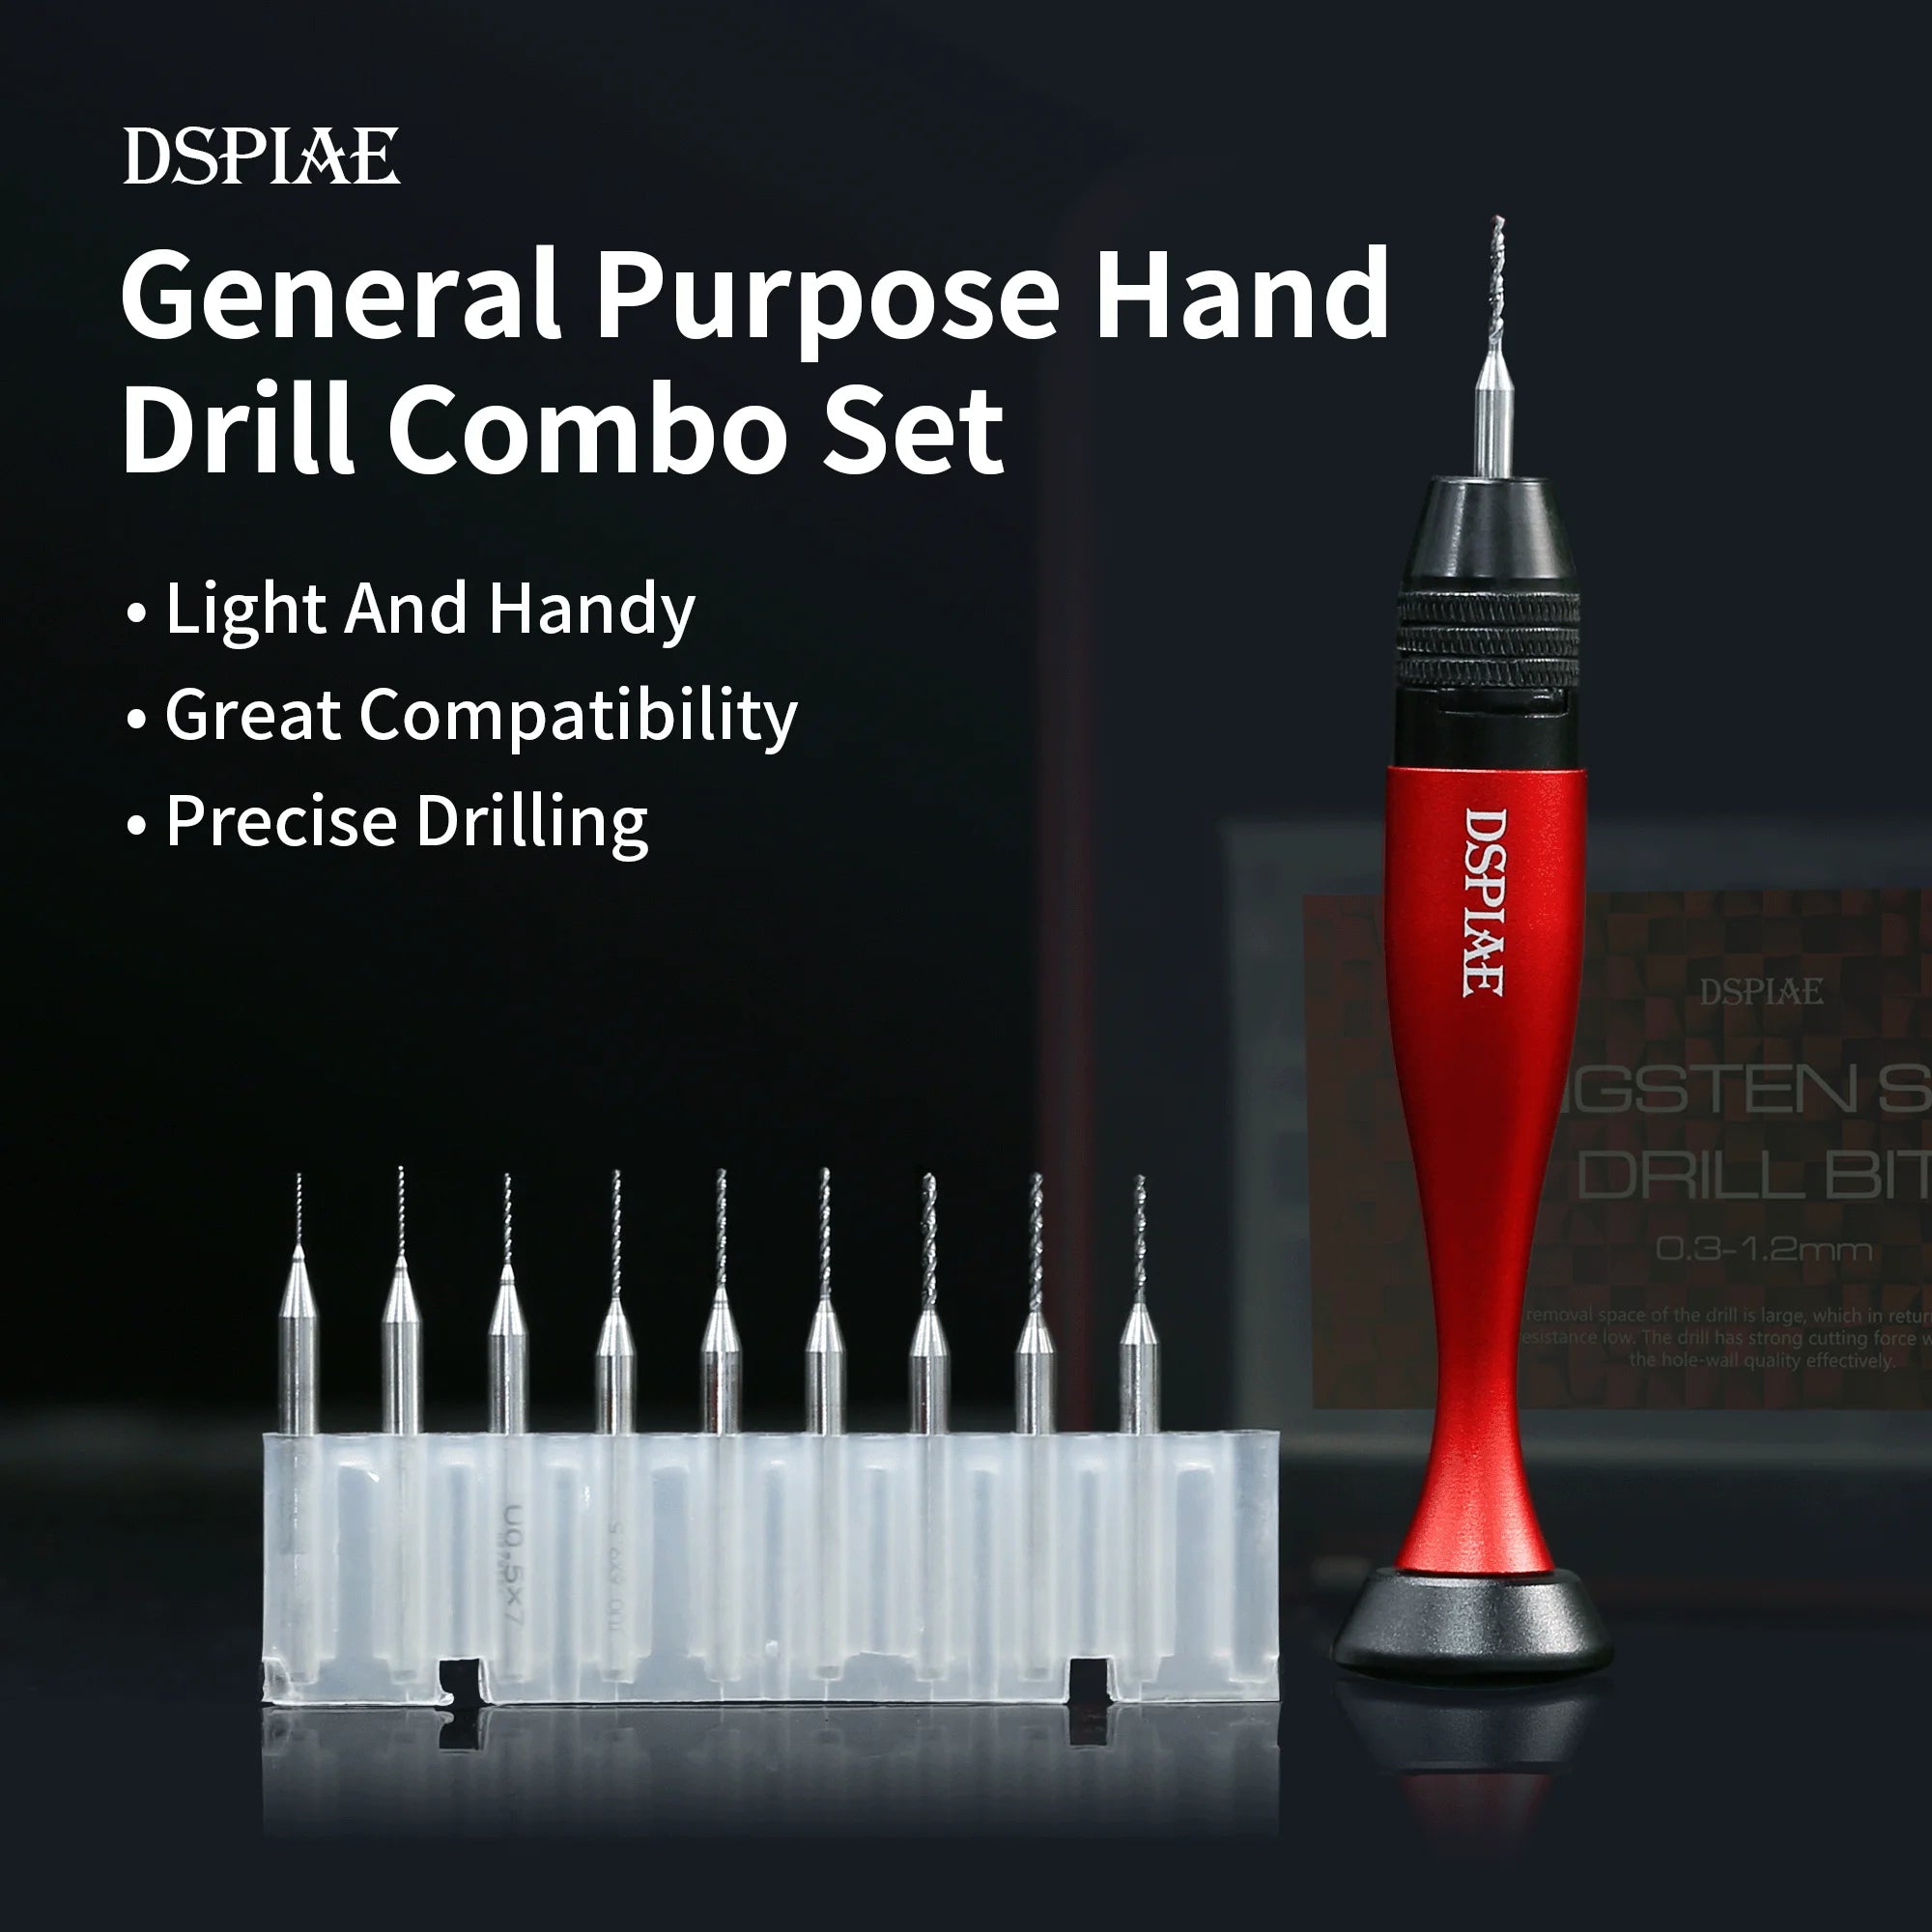 DSPIAE AT-VHDS - General Purpose Hand Drill Combo Set